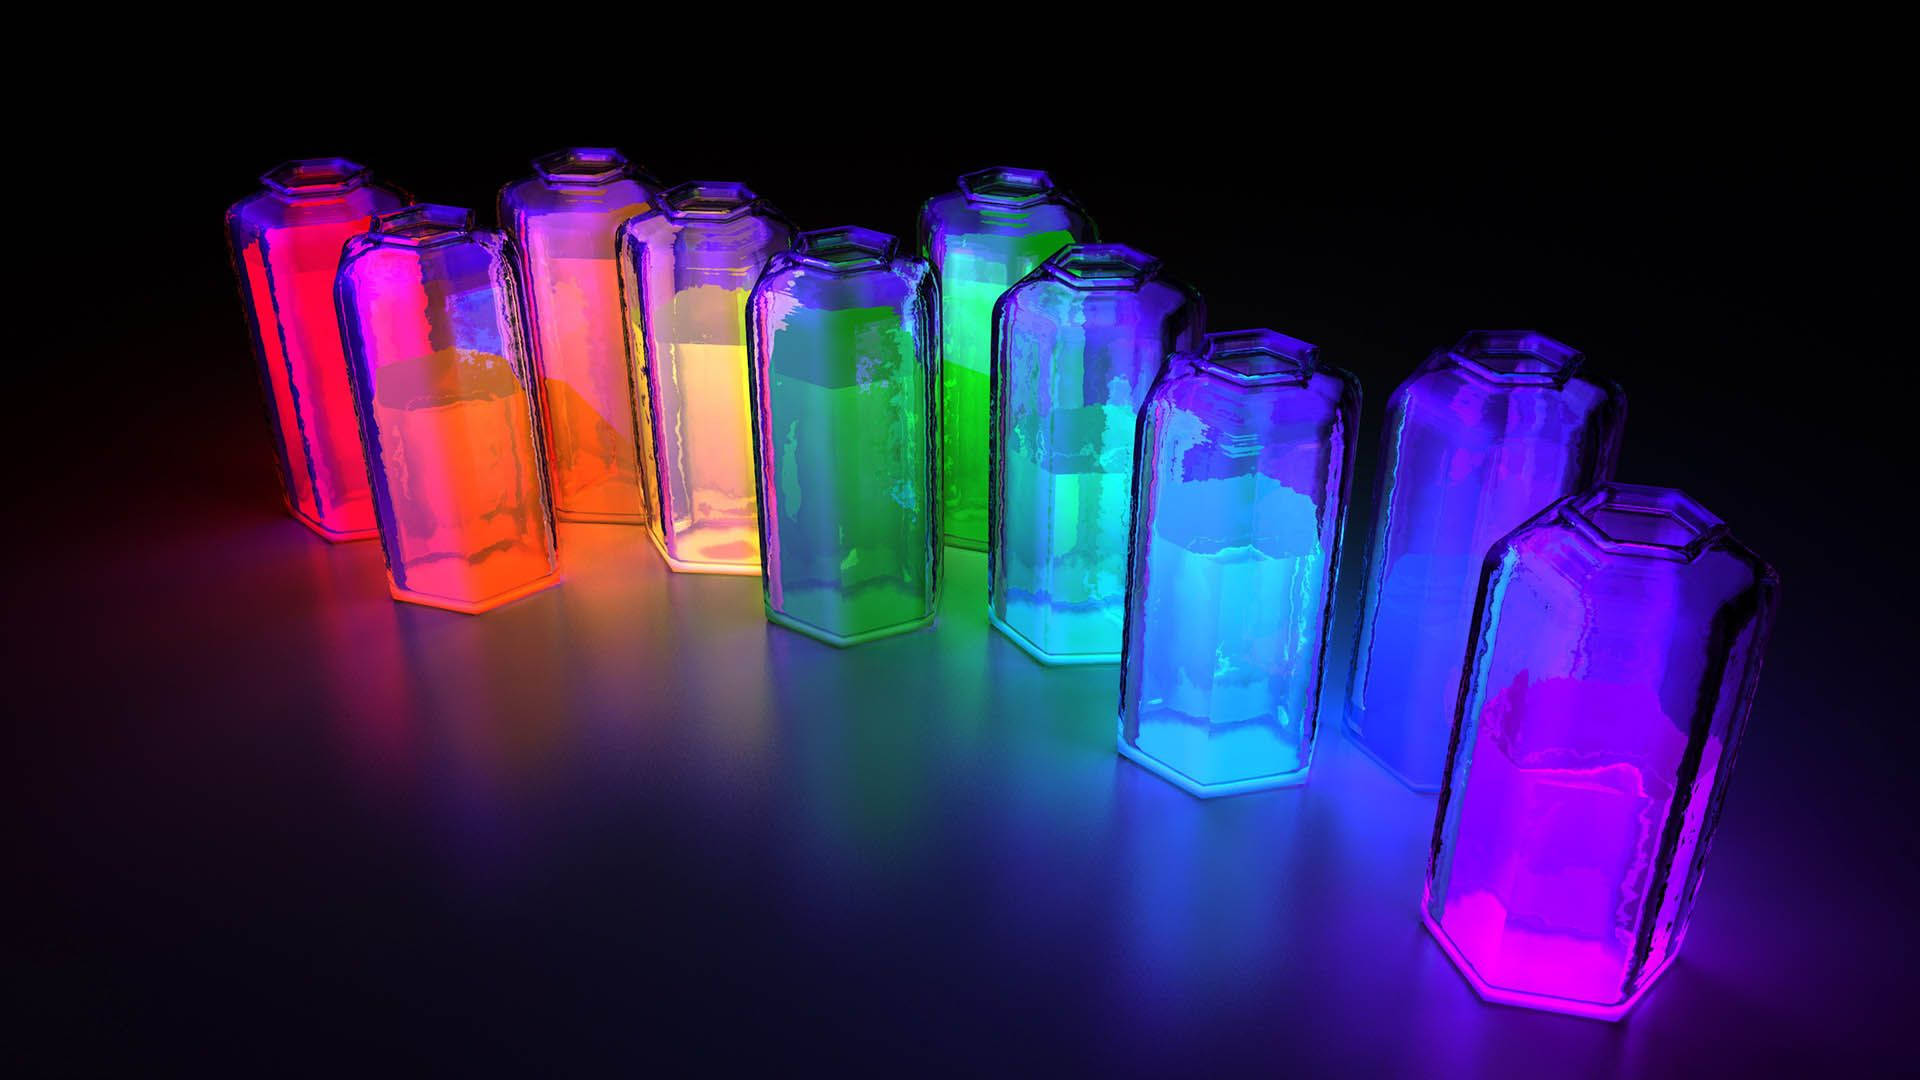 Awesome Colorful Glowing Bottles Wallpaper